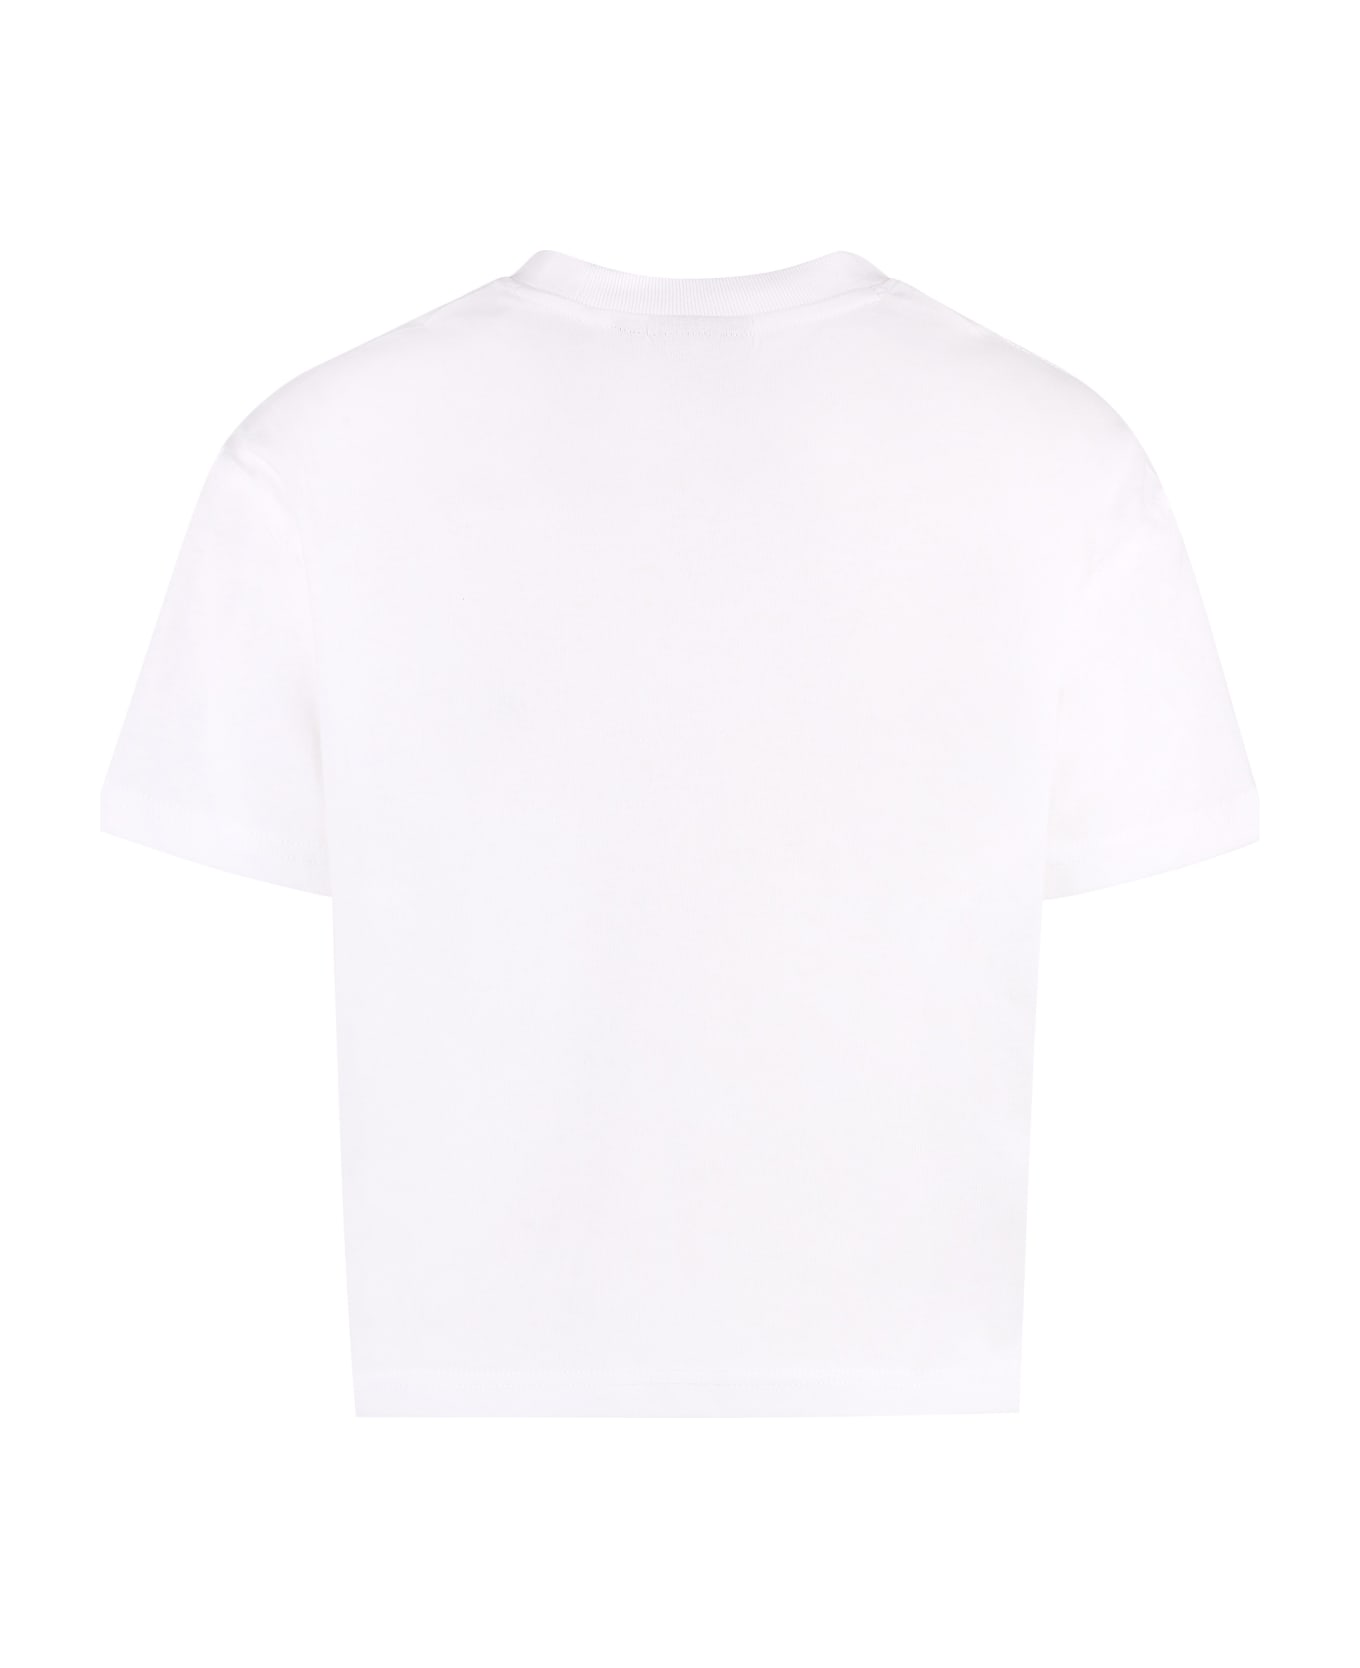 Dickies Oakport Cotton Crew-neck T-shirt - White Tシャツ